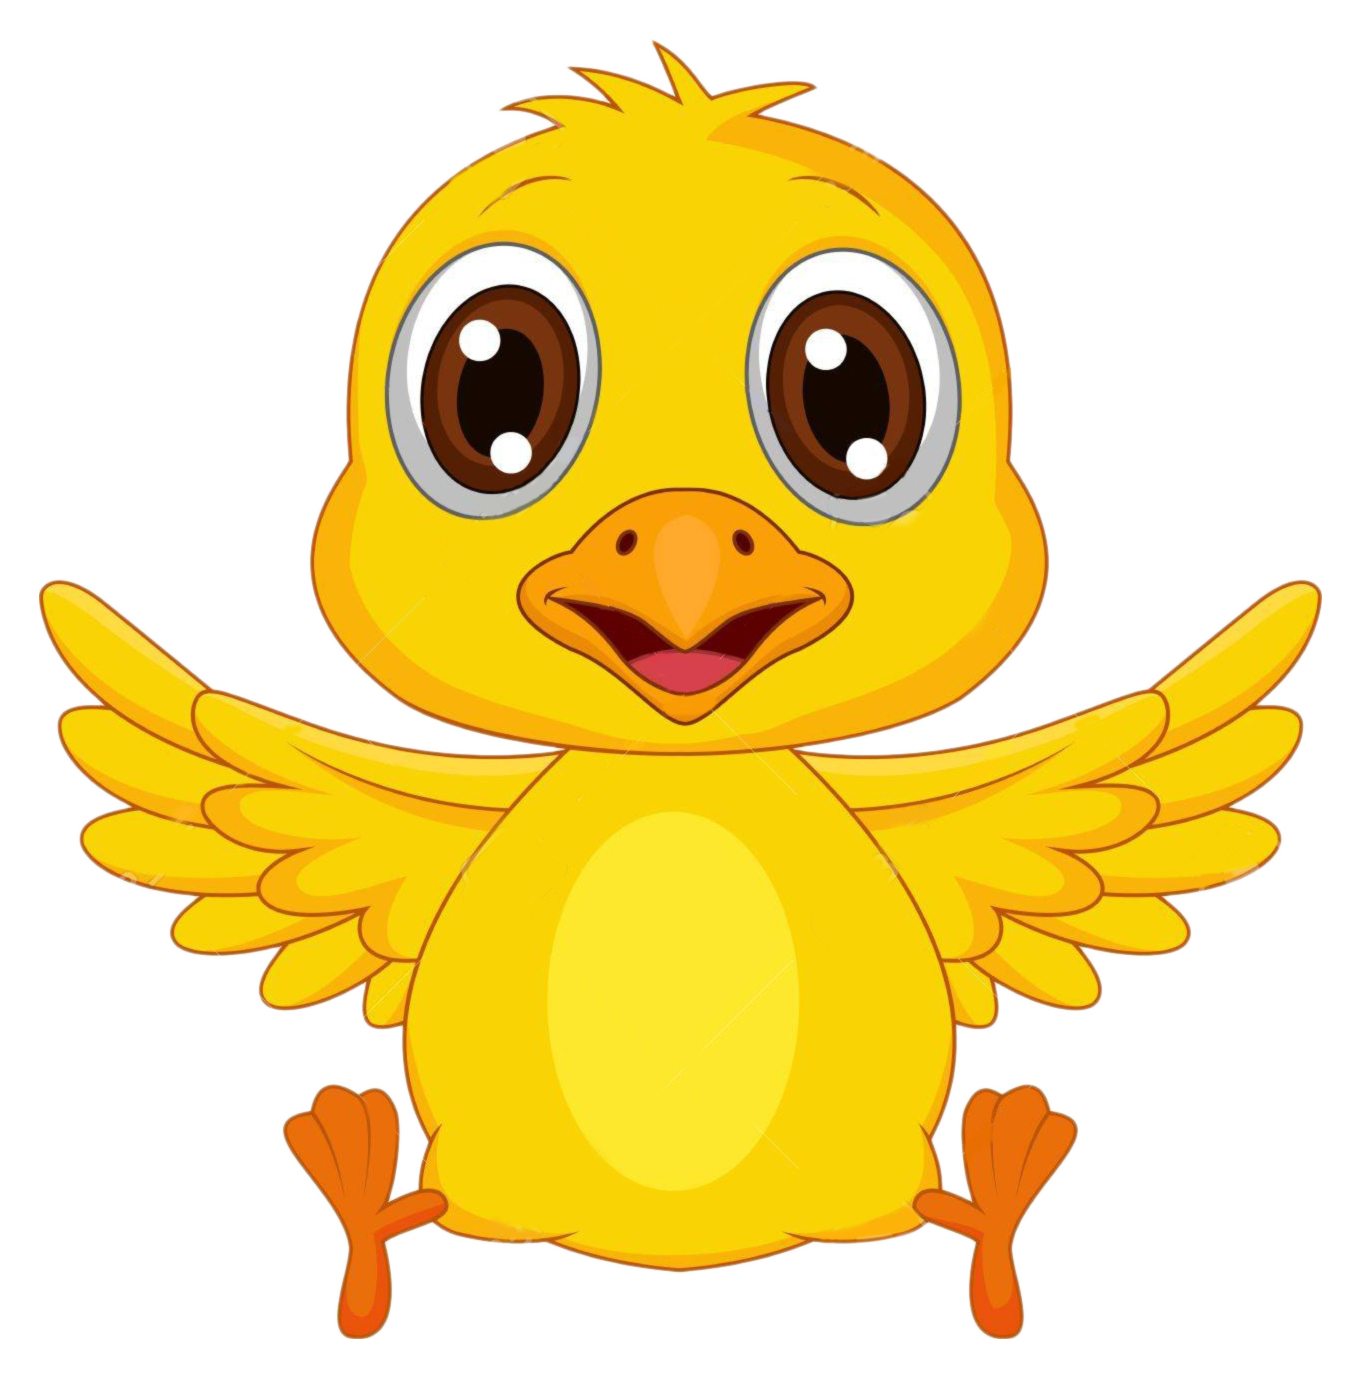 Duck Illustrations and Clipart